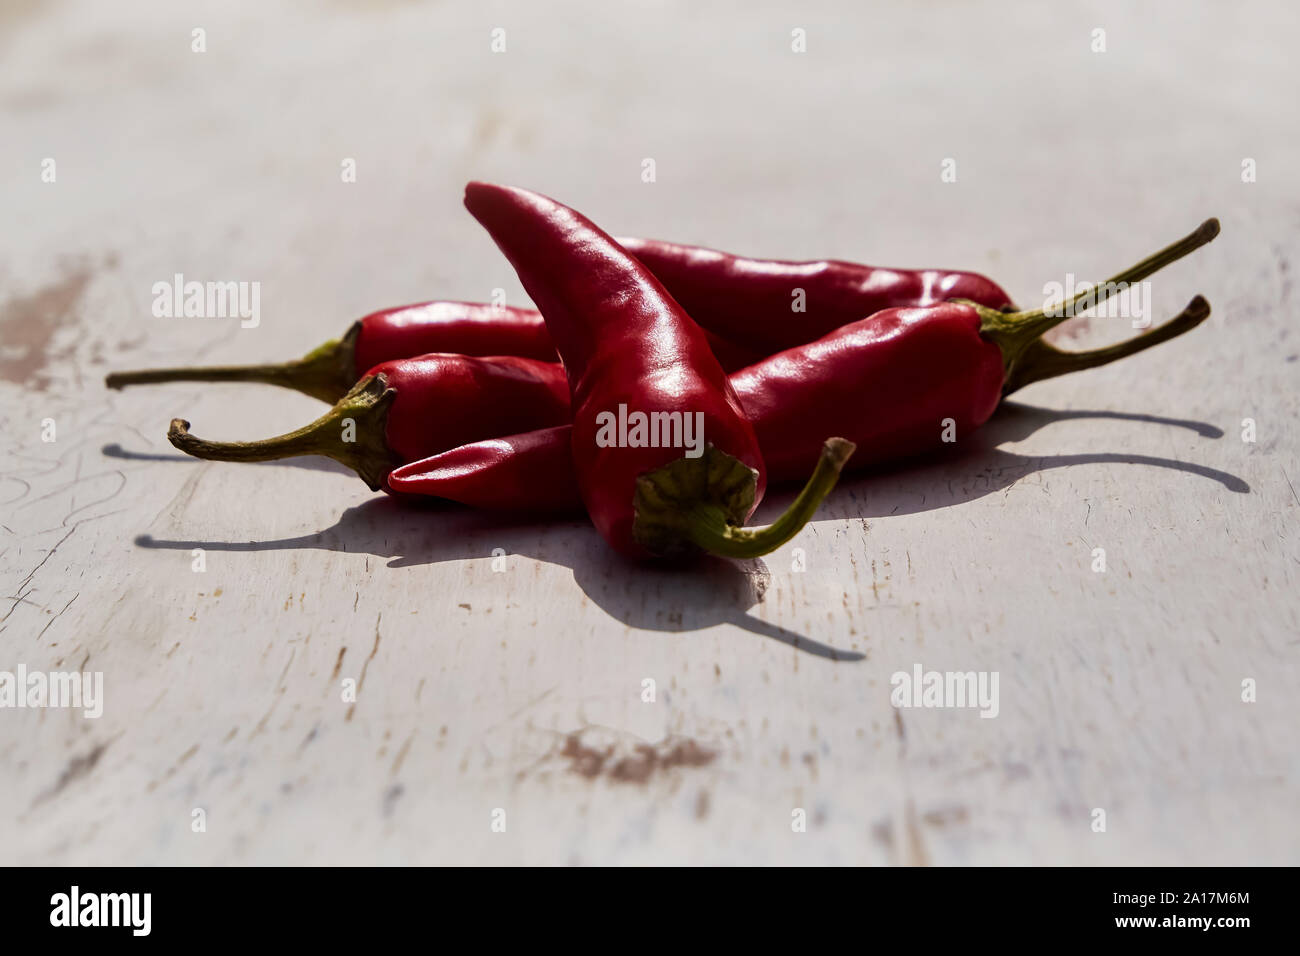 Fresh red chili peppers on an old vintage wooden table, copy space, soft selective focus Stock Photo